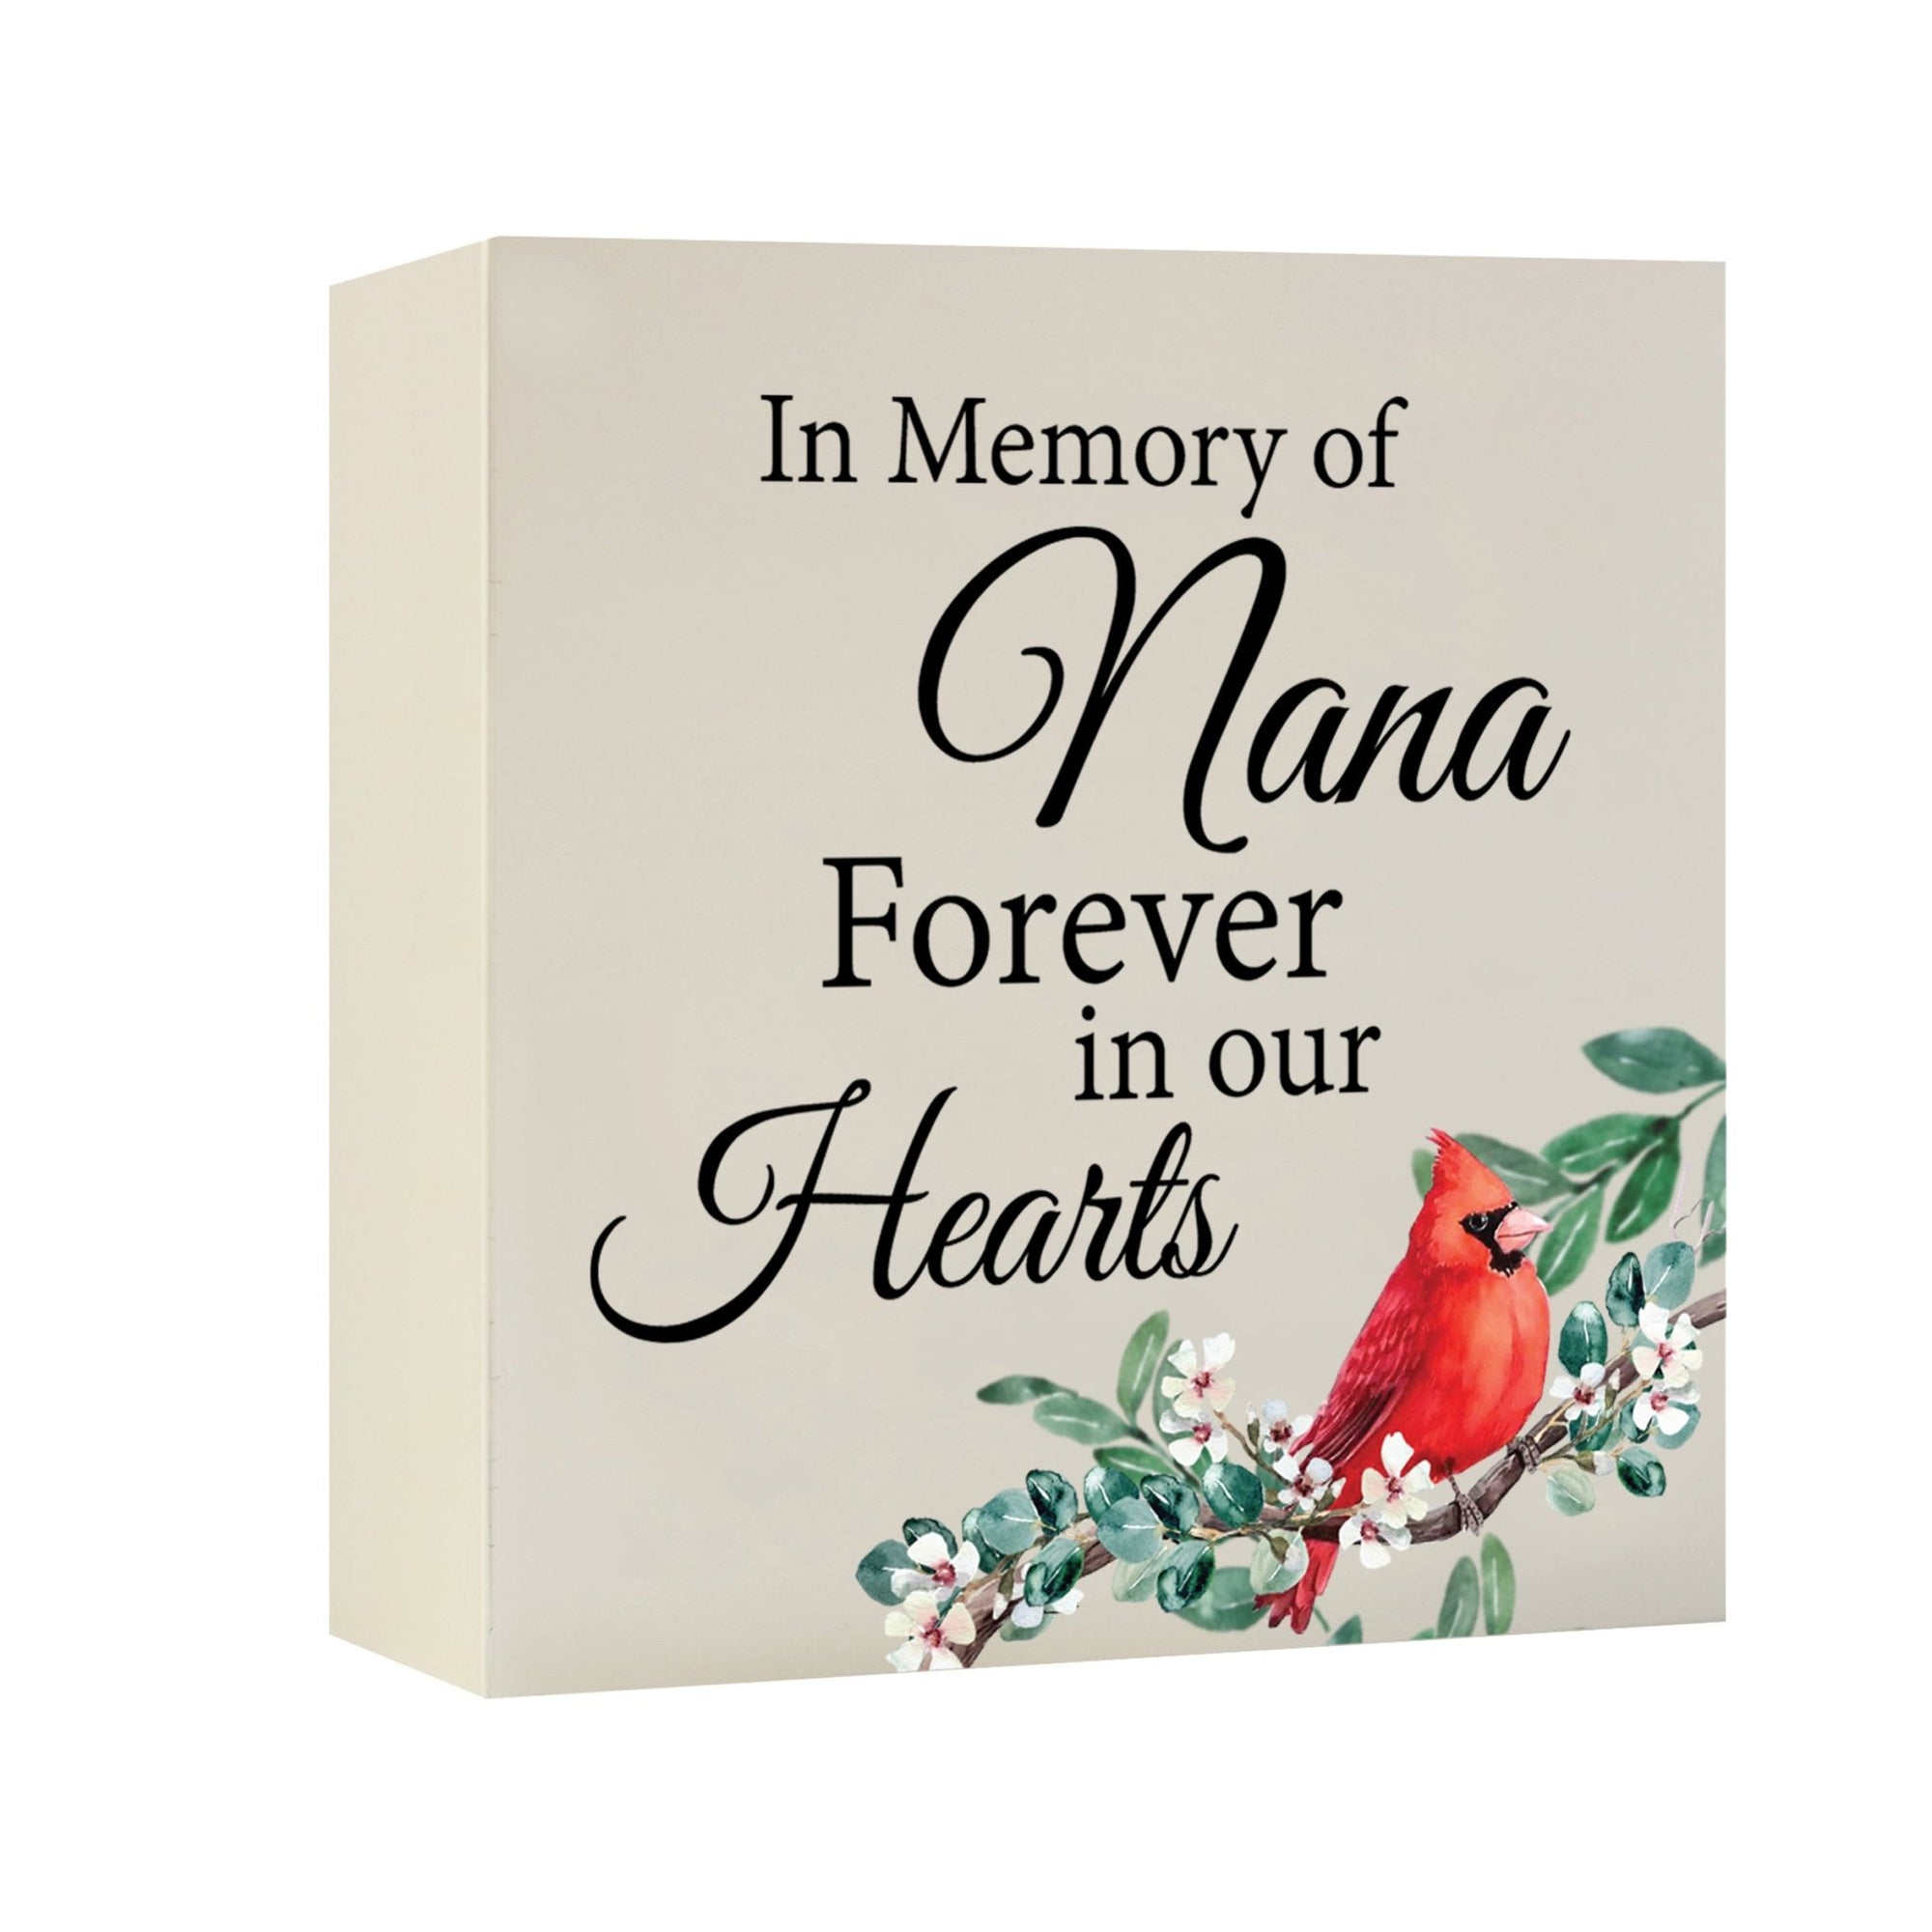 Decorative wooden urns for human ashes, a thoughtful and respectful choice for a memorial.